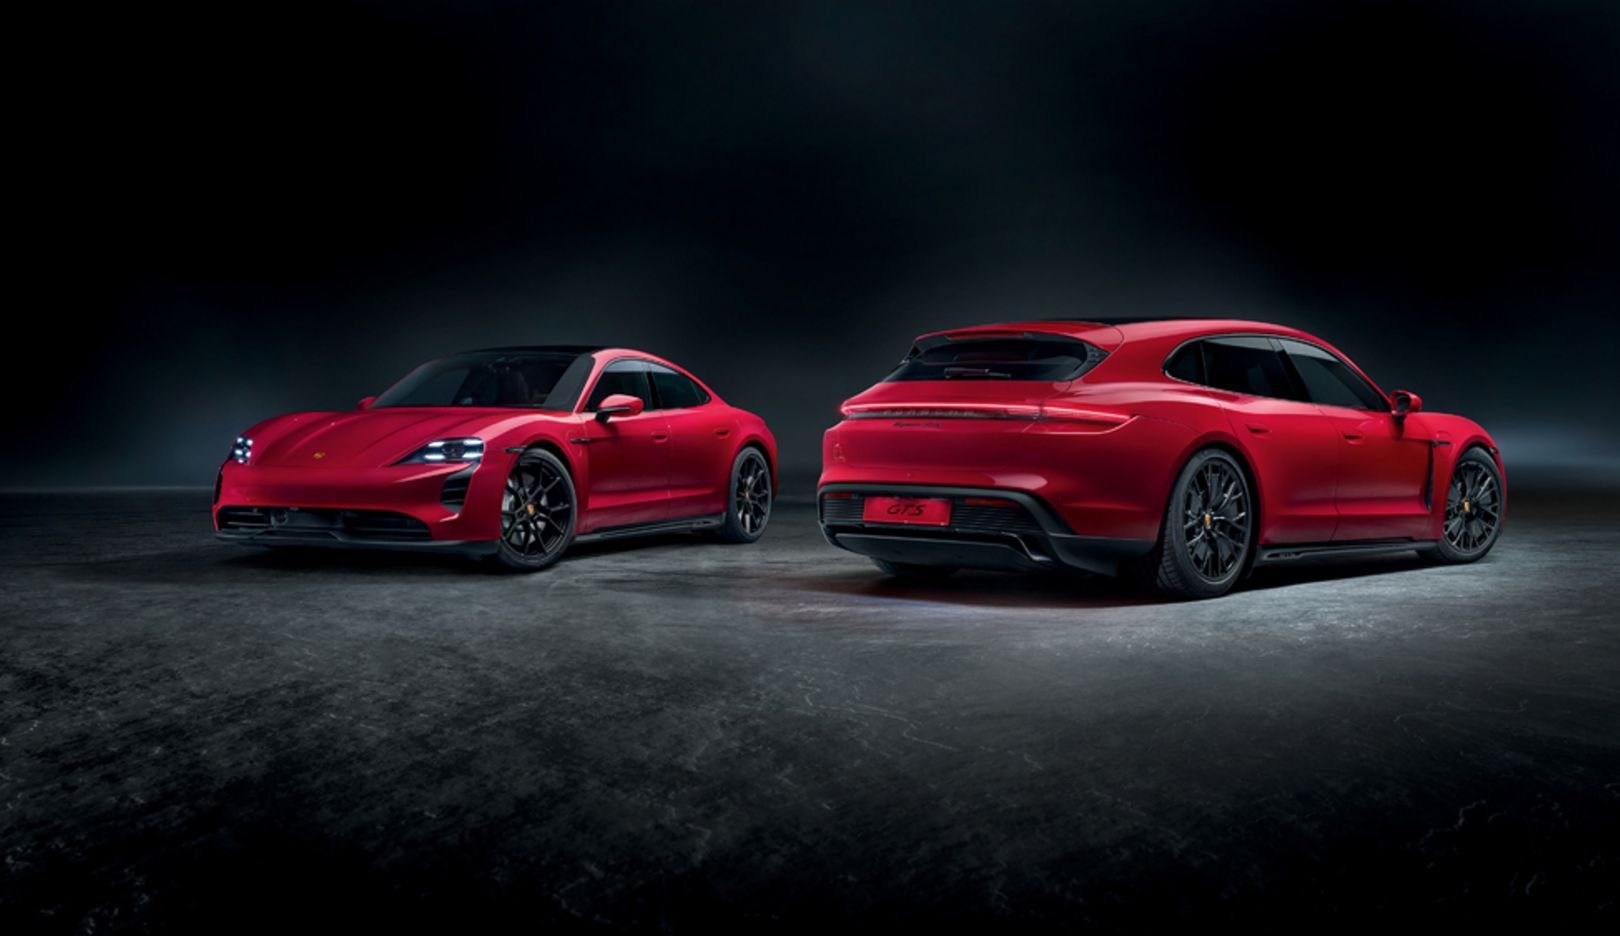 Presentation on the Pacific: The Taycan GTS Sport Turismo made its debut as the third body version of the first all-electric Porsche model series at the Los Angeles Auto Show.